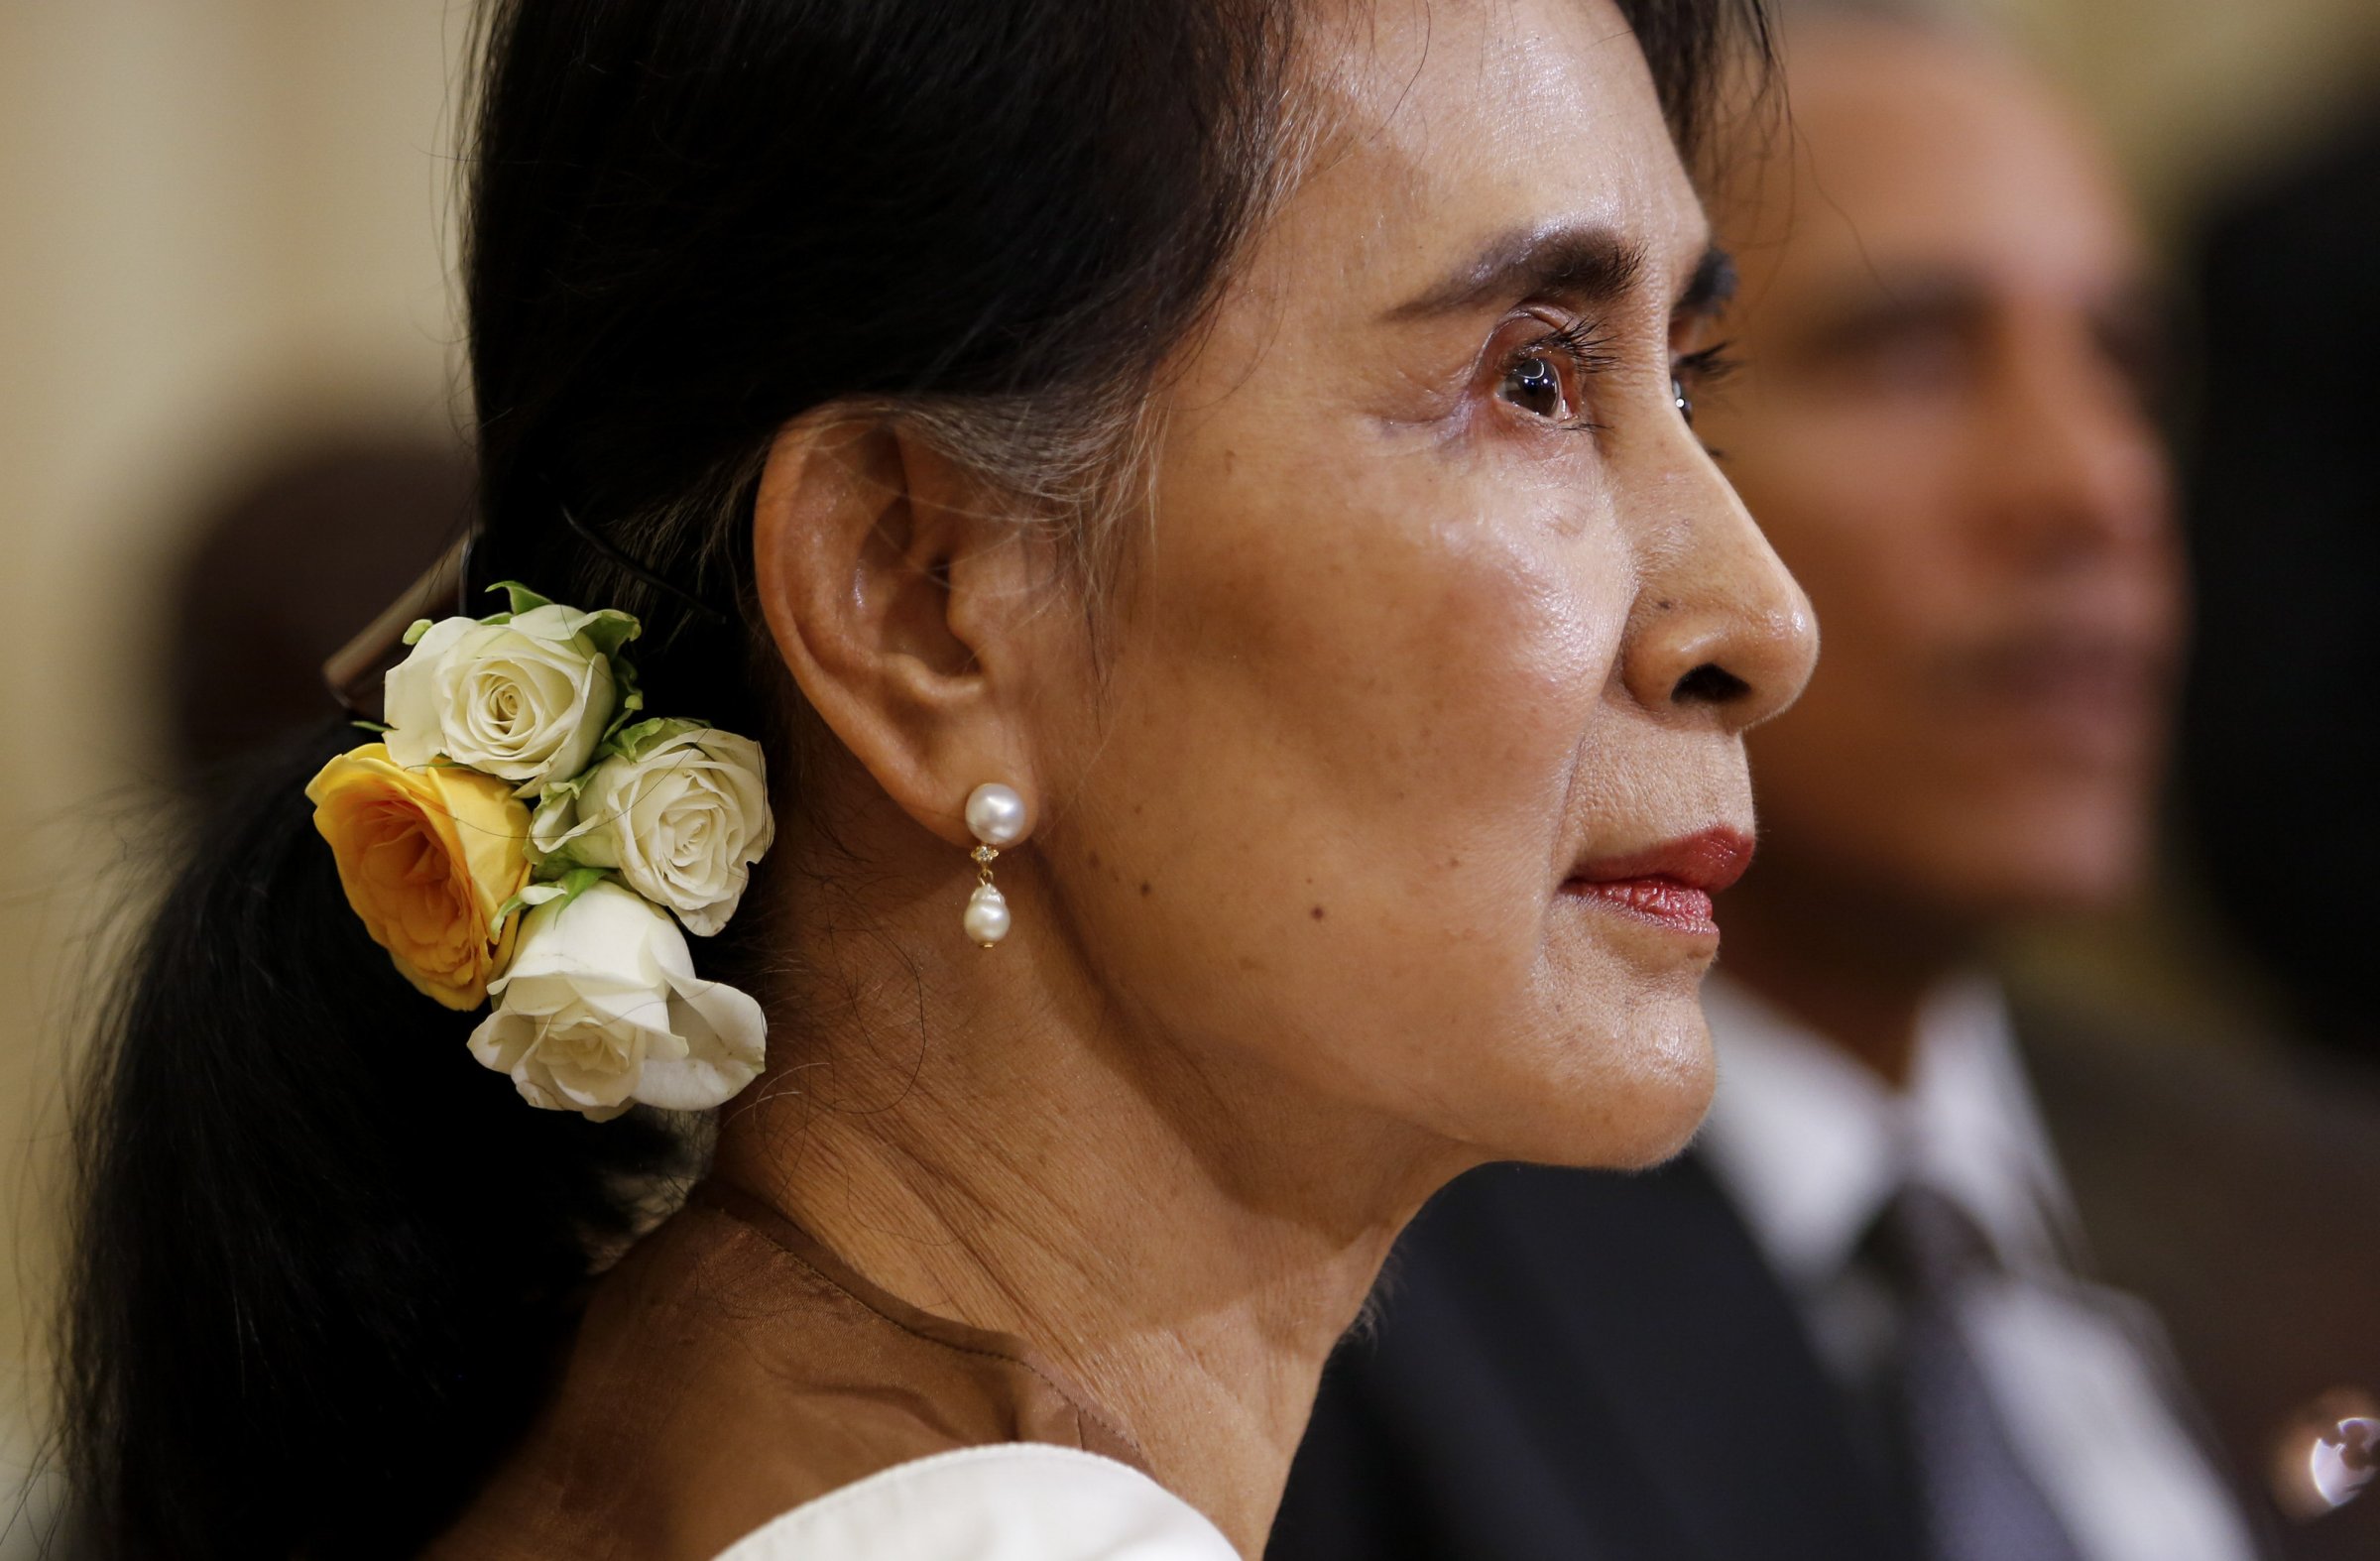 Myanmar State Counselor Aung San Suu Kyi Meets President Obama At The White House